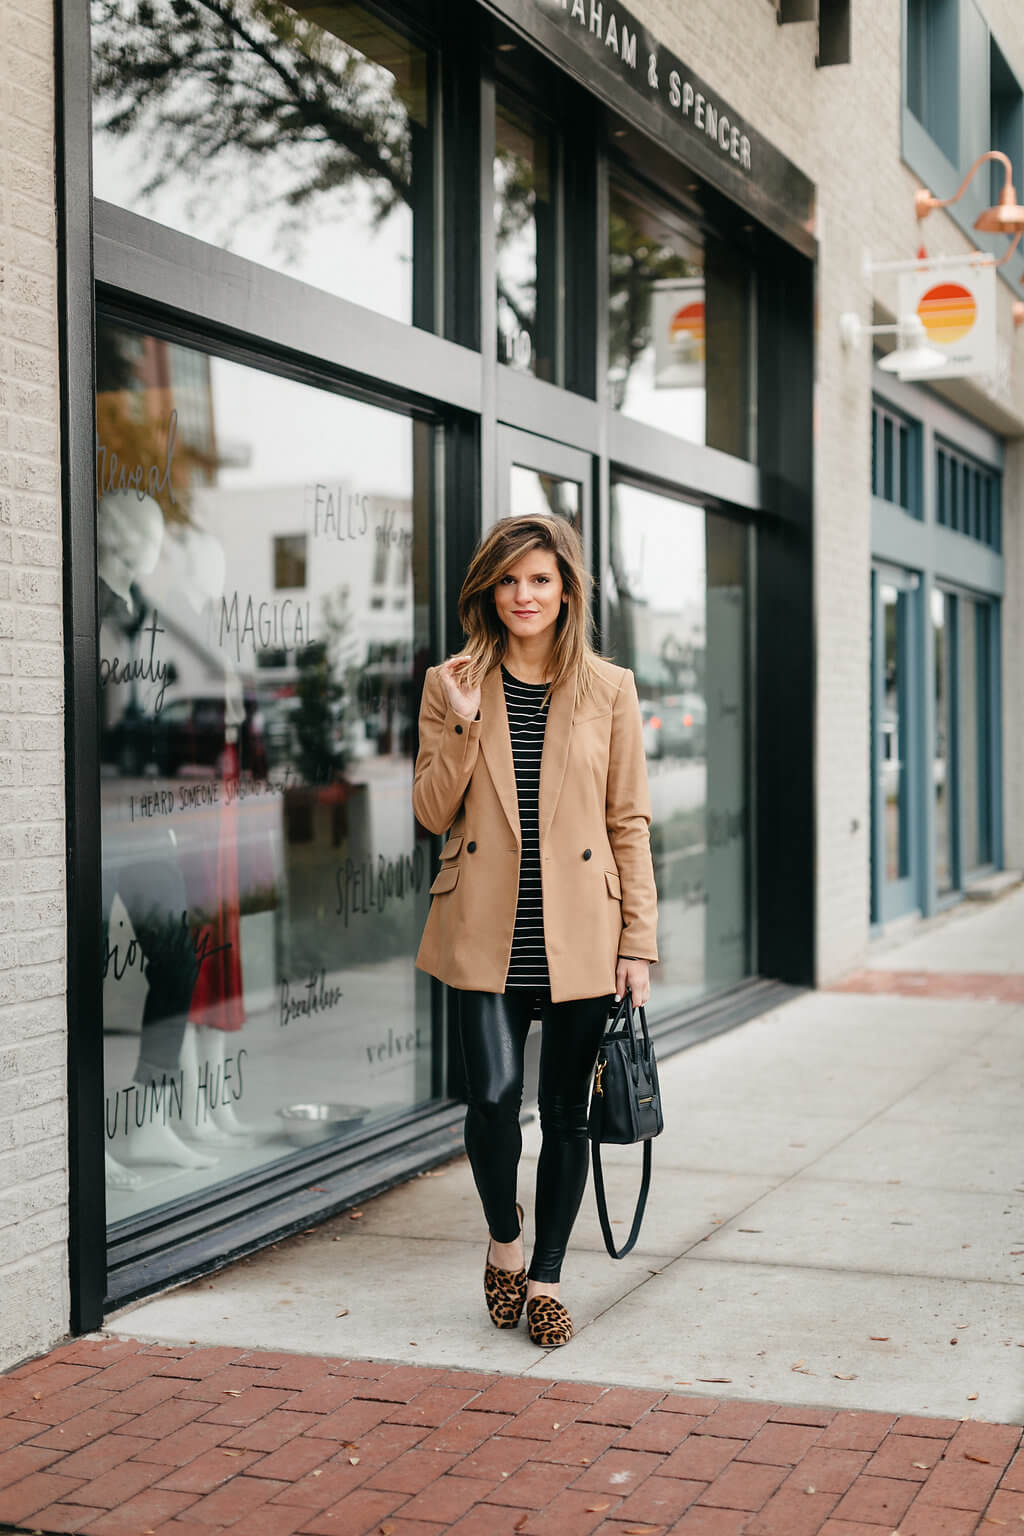 leggings and blazer outfit